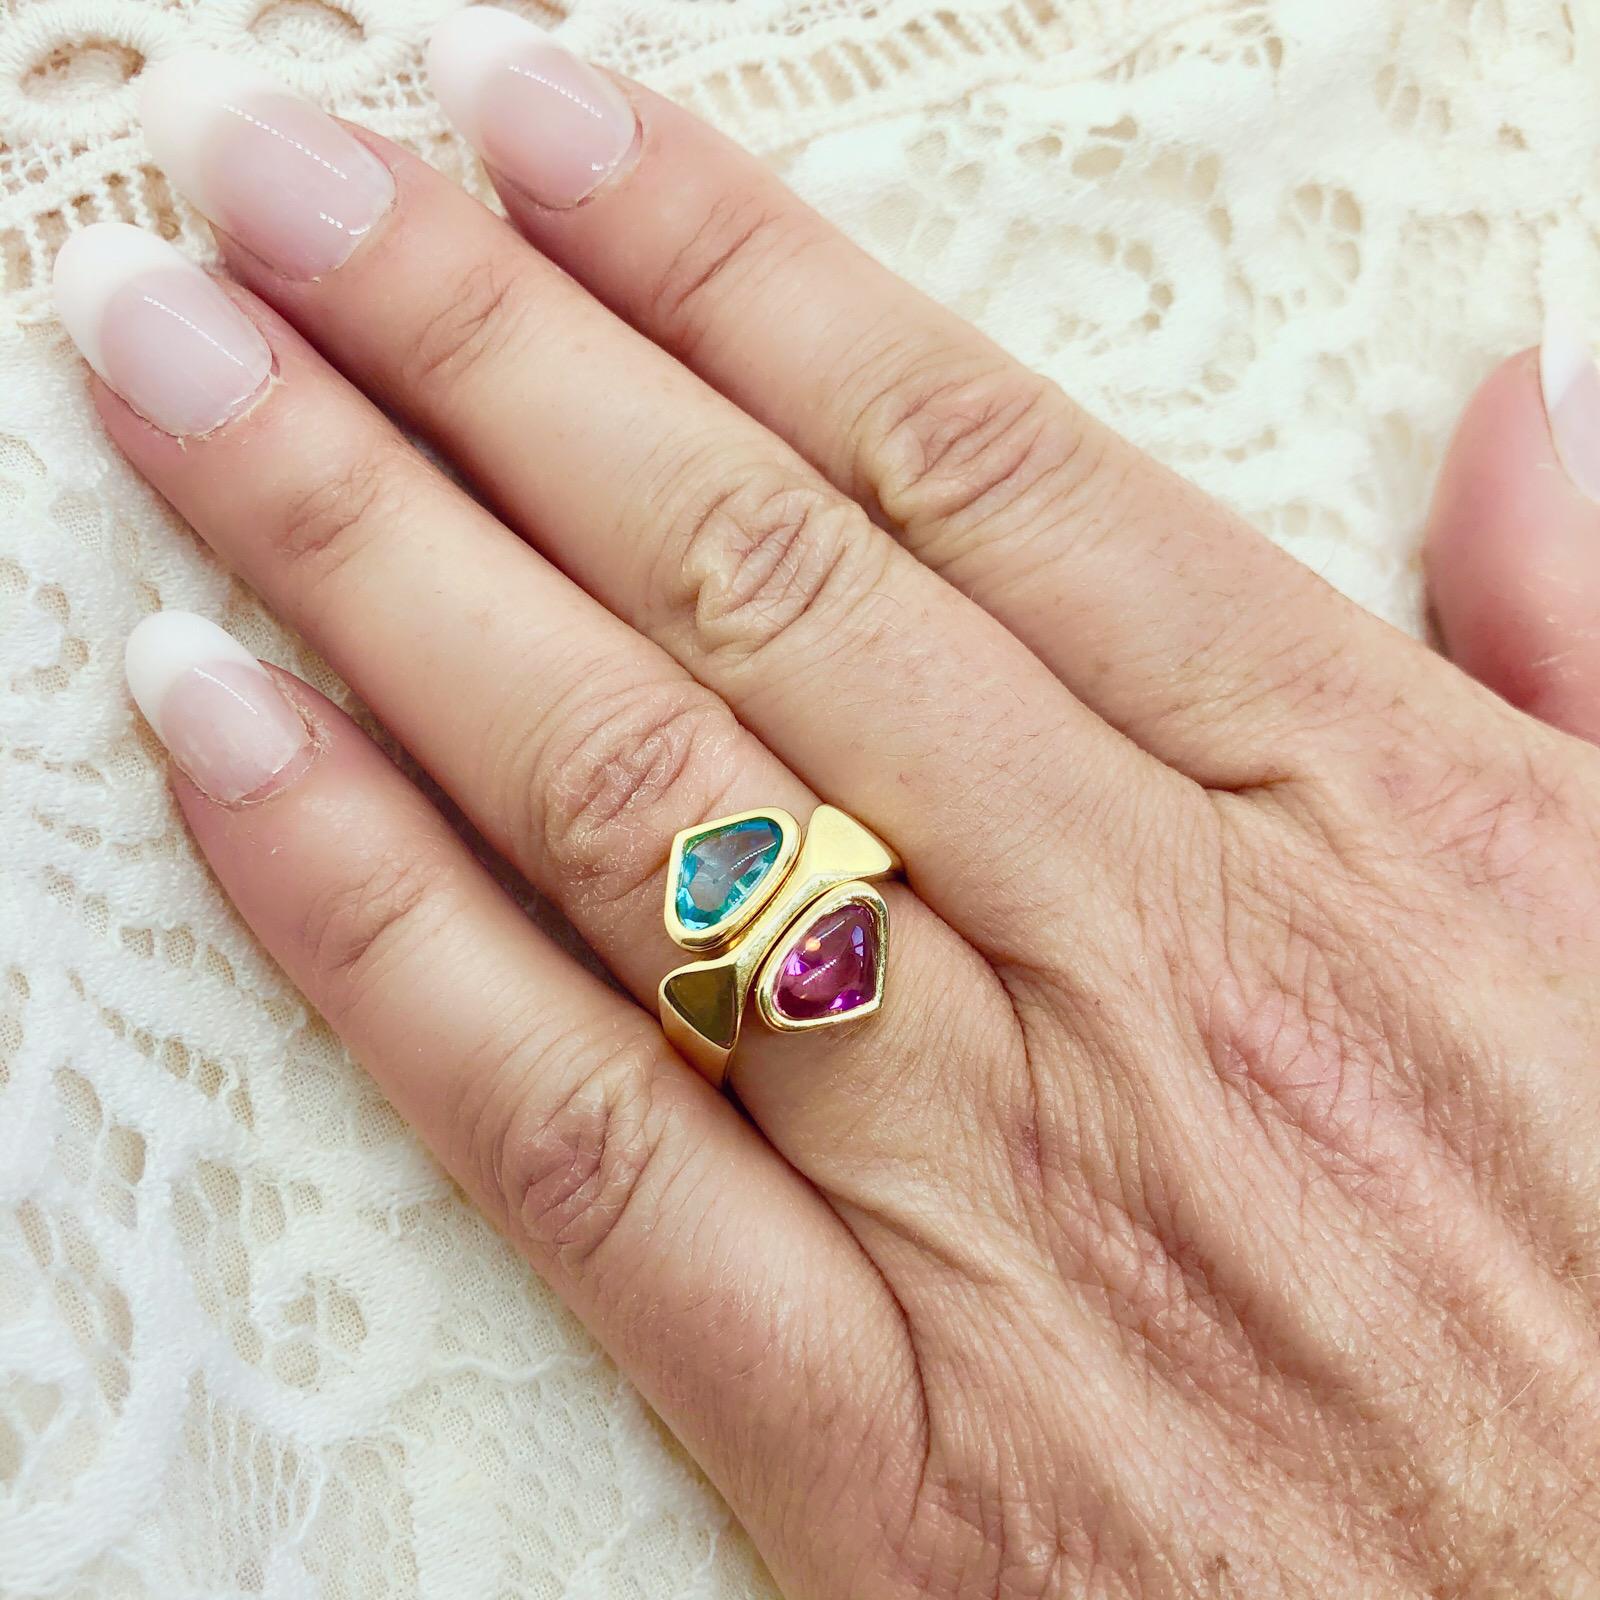 Four rings in one! This unique 18k gold ring set by famed designed Marina B. of the one and only Bulgari family, has 4 interchangeable semi-precious duos in either white or yellow gold, including citrine, tourmaline, amethyst and blue topaz that